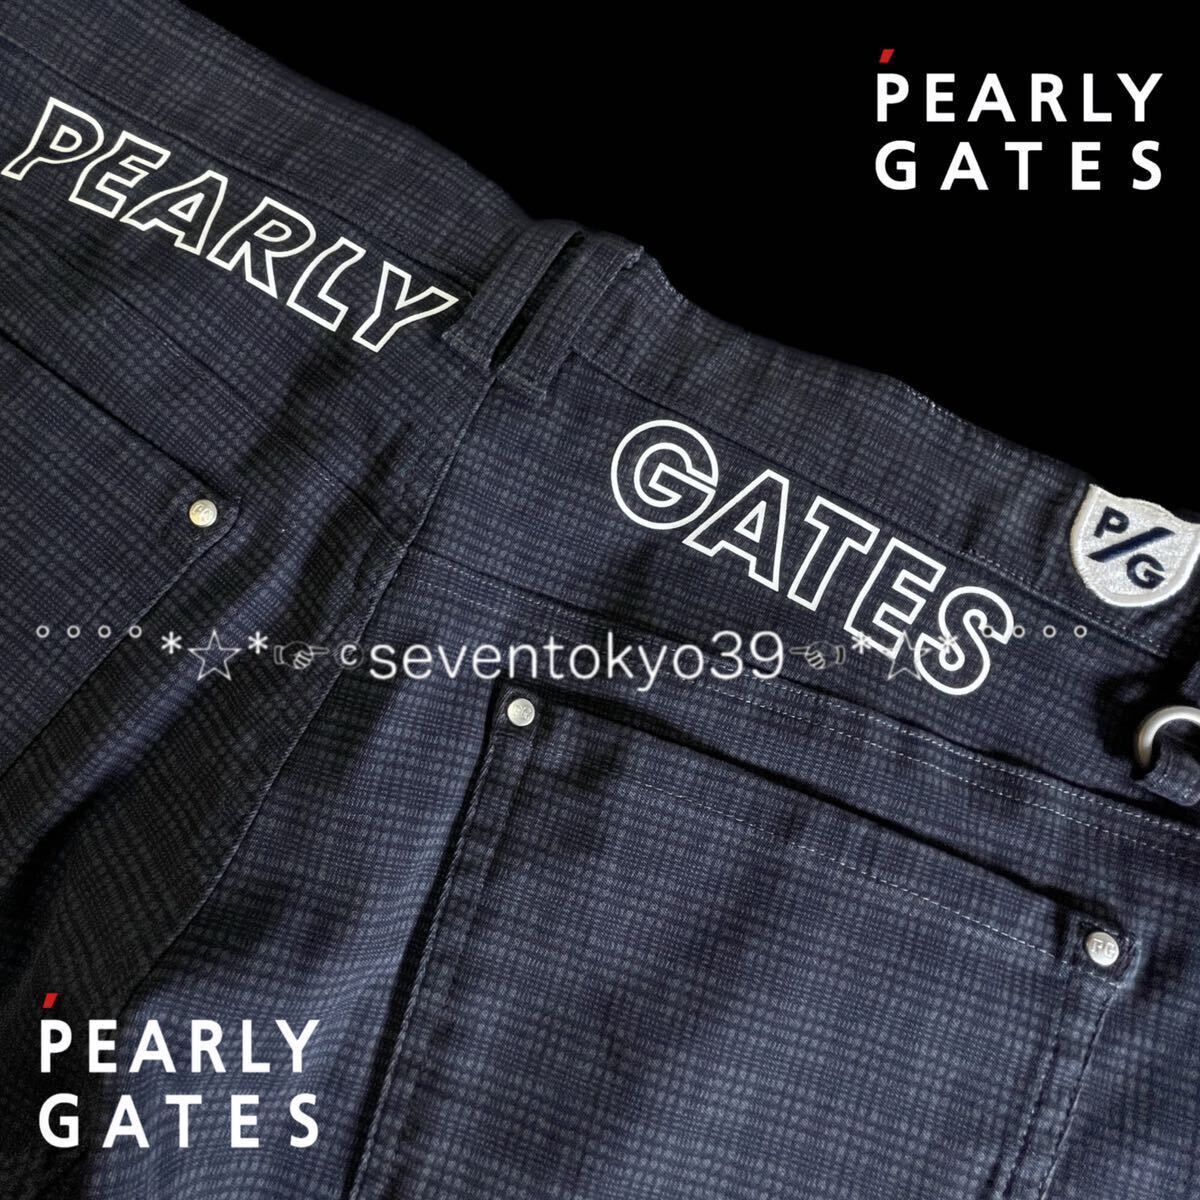  new arrival genuine article new goods 41087185 PEARLY GATES Pearly Gates /5(L) super popular Toriko chin pants Newtype power type stretch Silhouette guarantee .